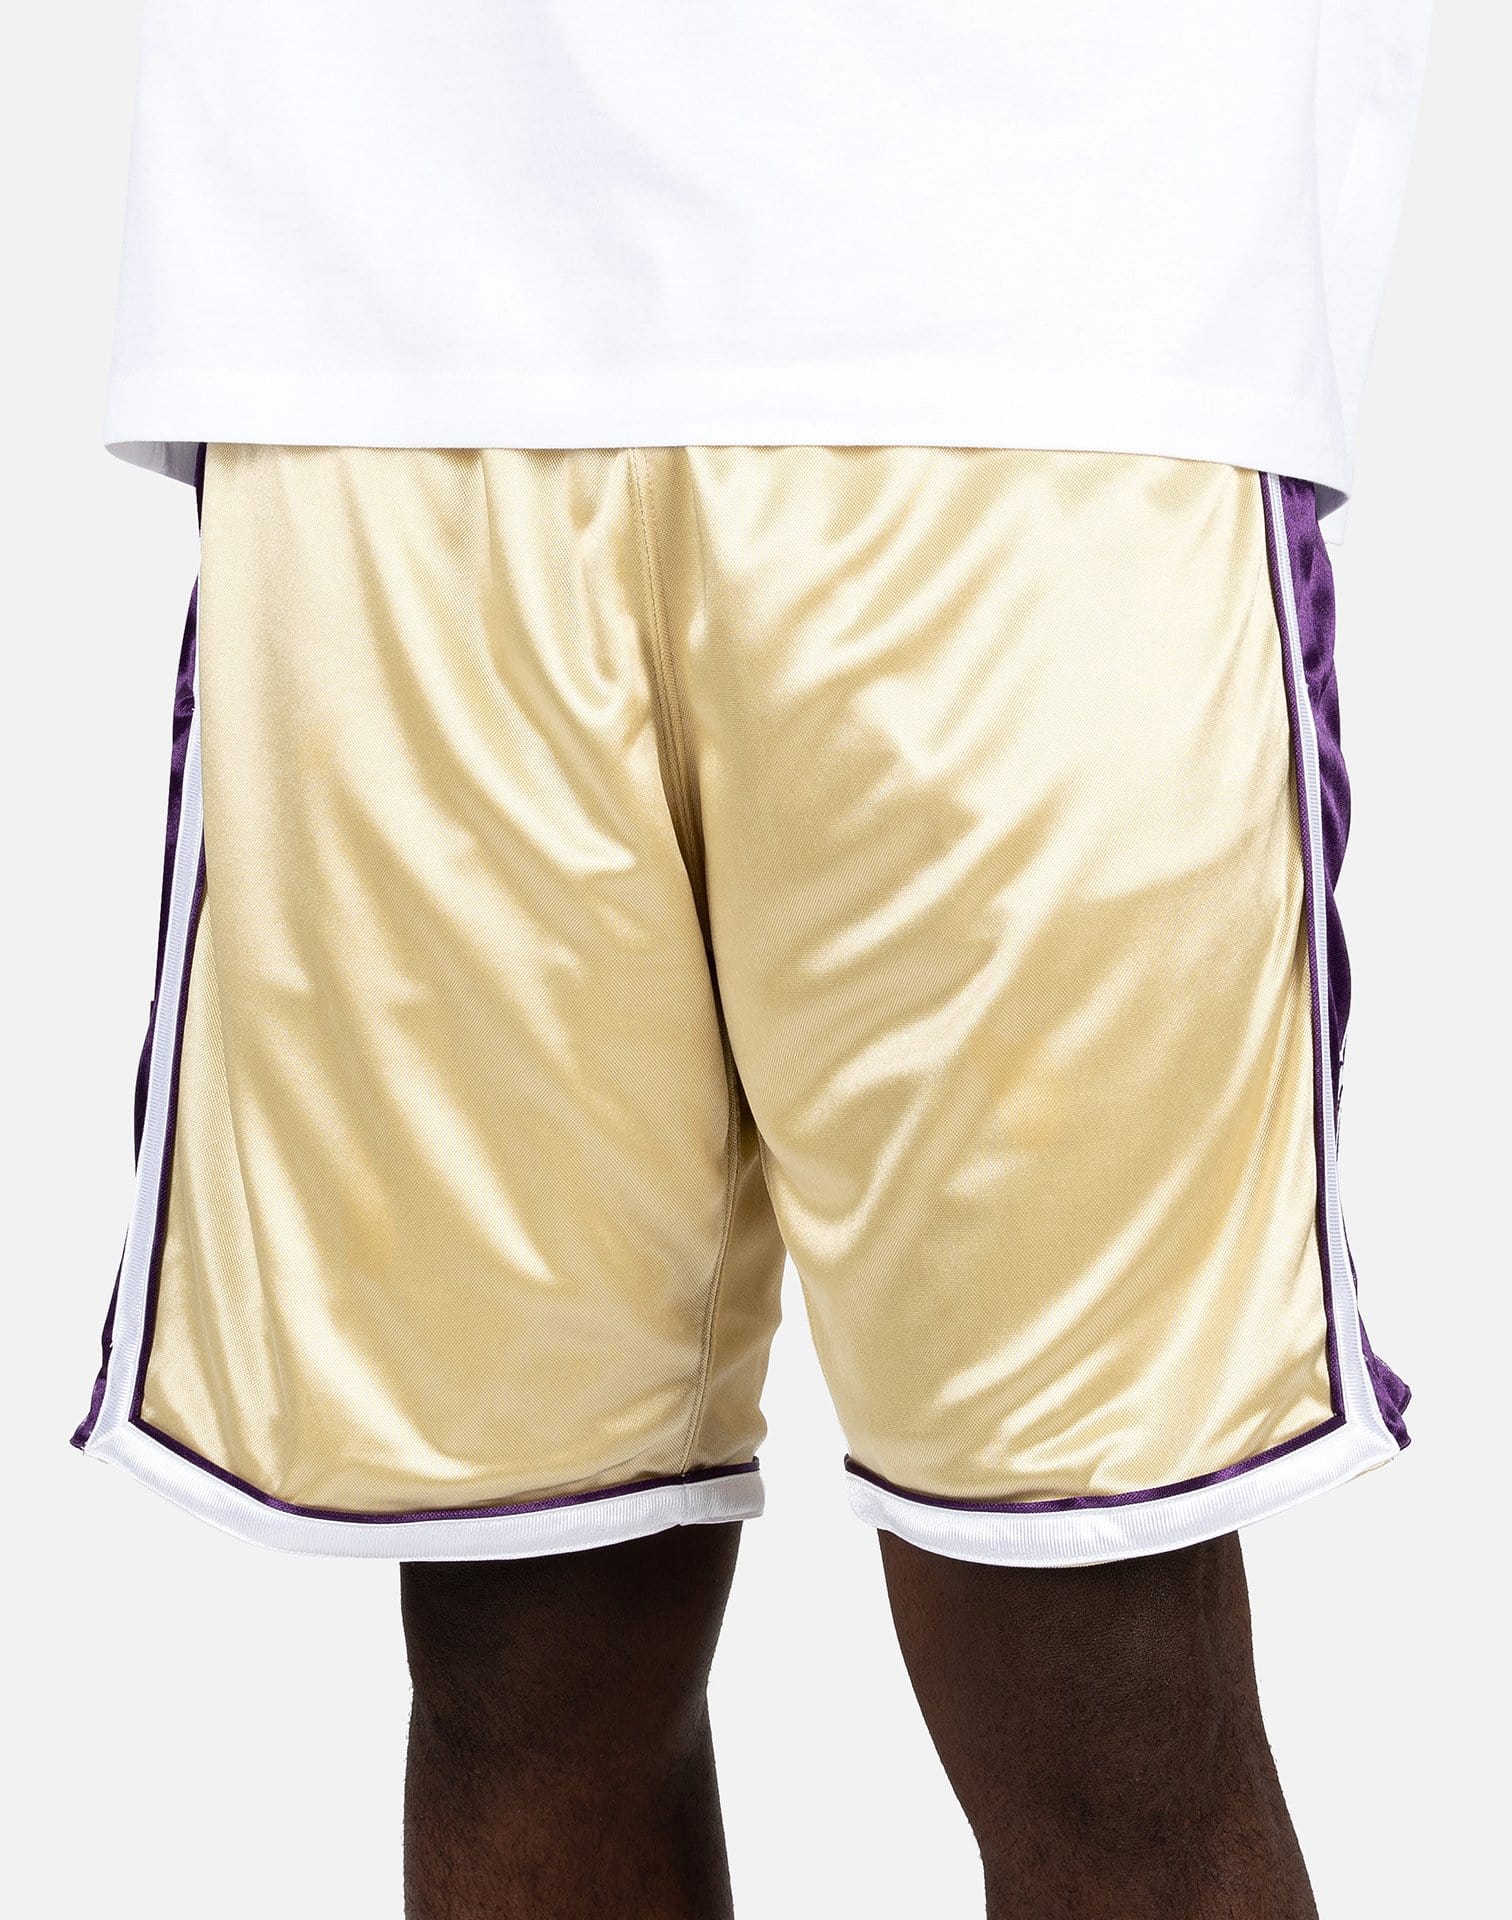 Mitchell & Ness NBA LA LAKERS KOBE BRYANT AUTHENTIC HALL OF FAME JERSEY SHORTS  - Gold - Size: XLG